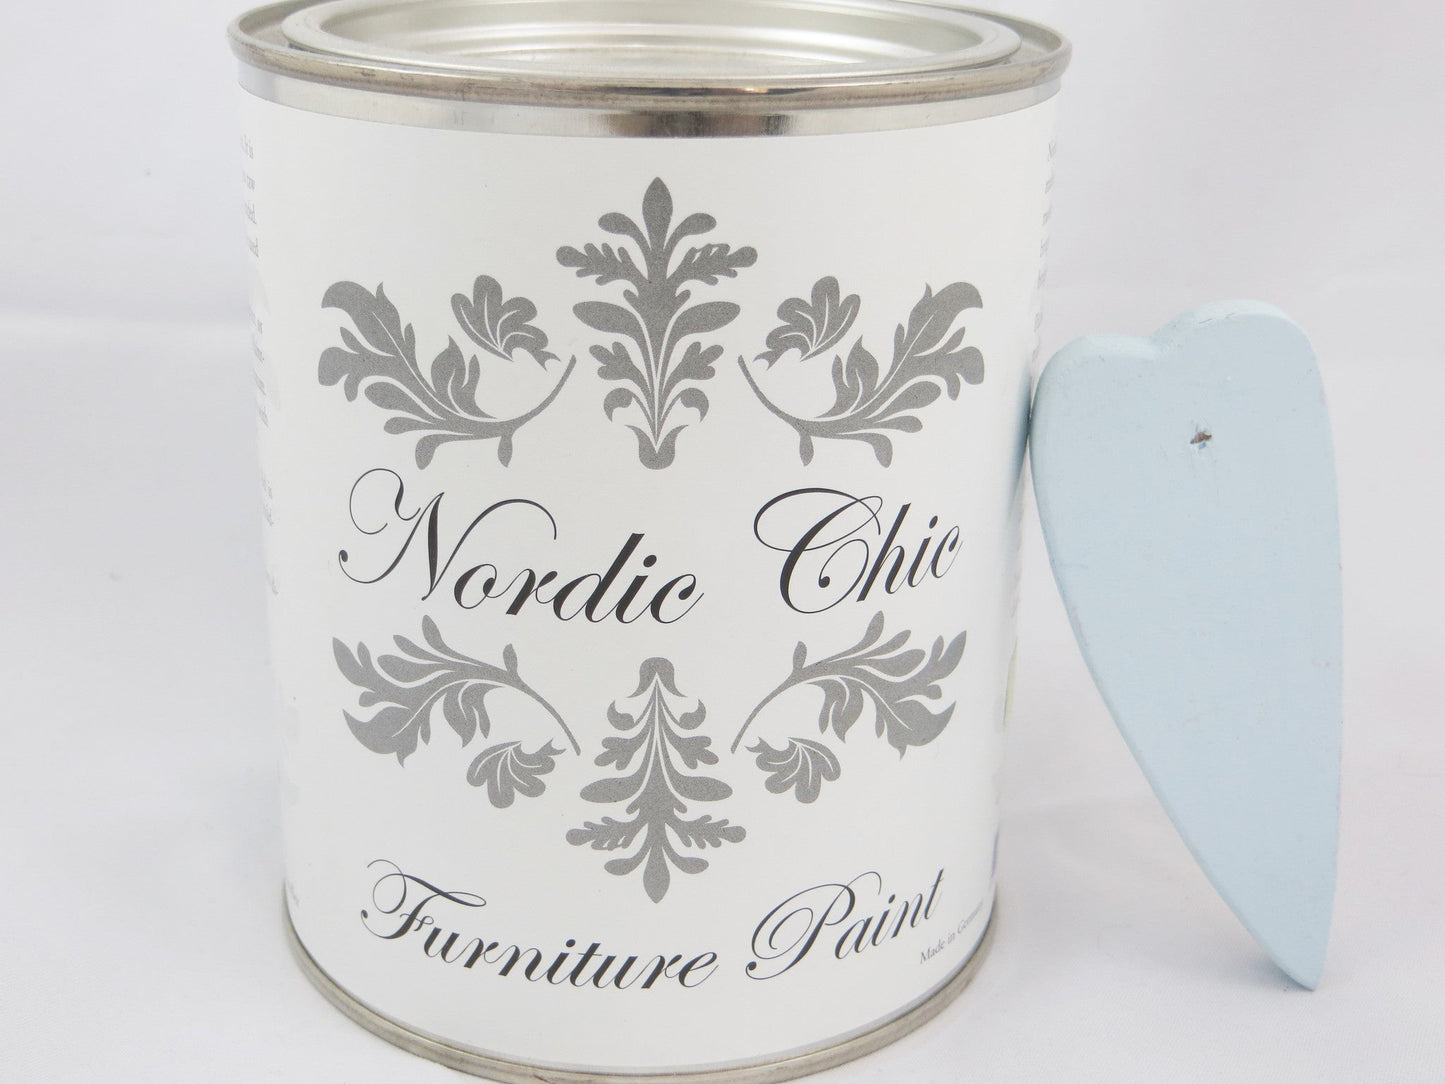 Nordic Chic Furniture Paint - Tinkerbell - Nordic Chic®